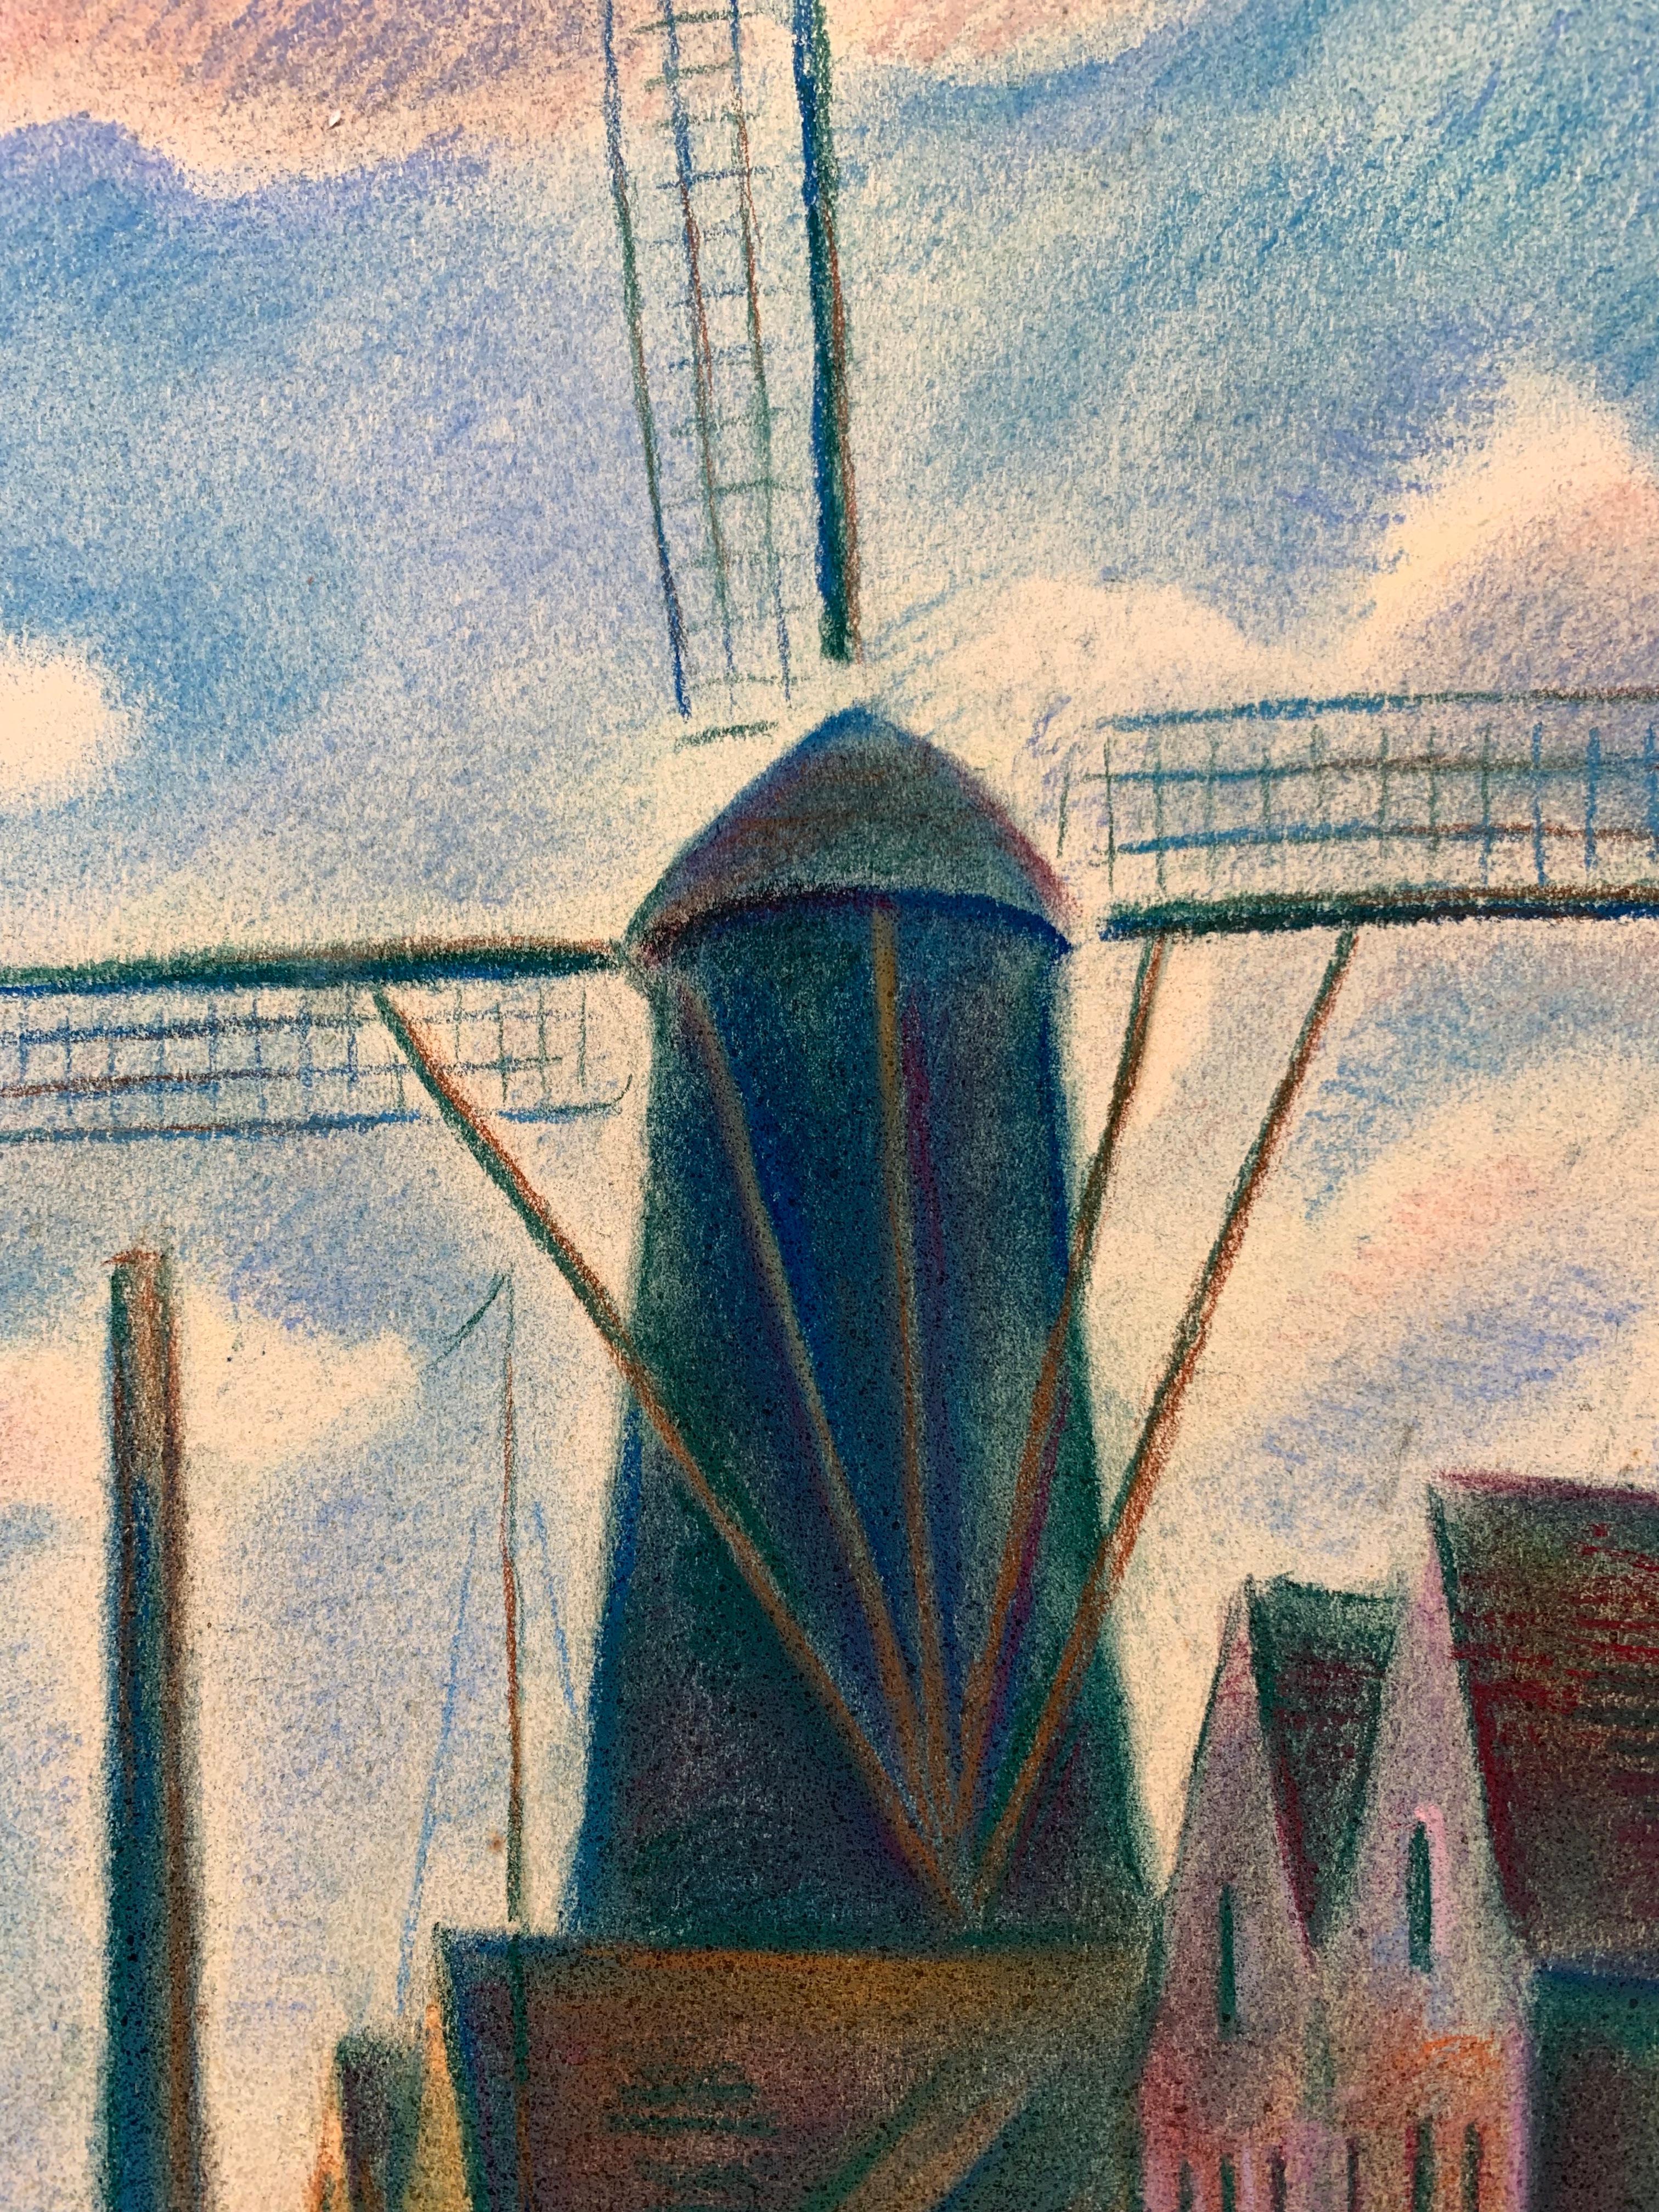 Theodor Alescha (1898-1991). Netherlands harbor scene, ca. 1935. Pastel on paper mounted to illustration board, 18 x 24 inches. Measures 24 x 30 inches framed. Signed lower right. Excellent condition. 

Theodor Alescha was born in 1898 in Vienna.